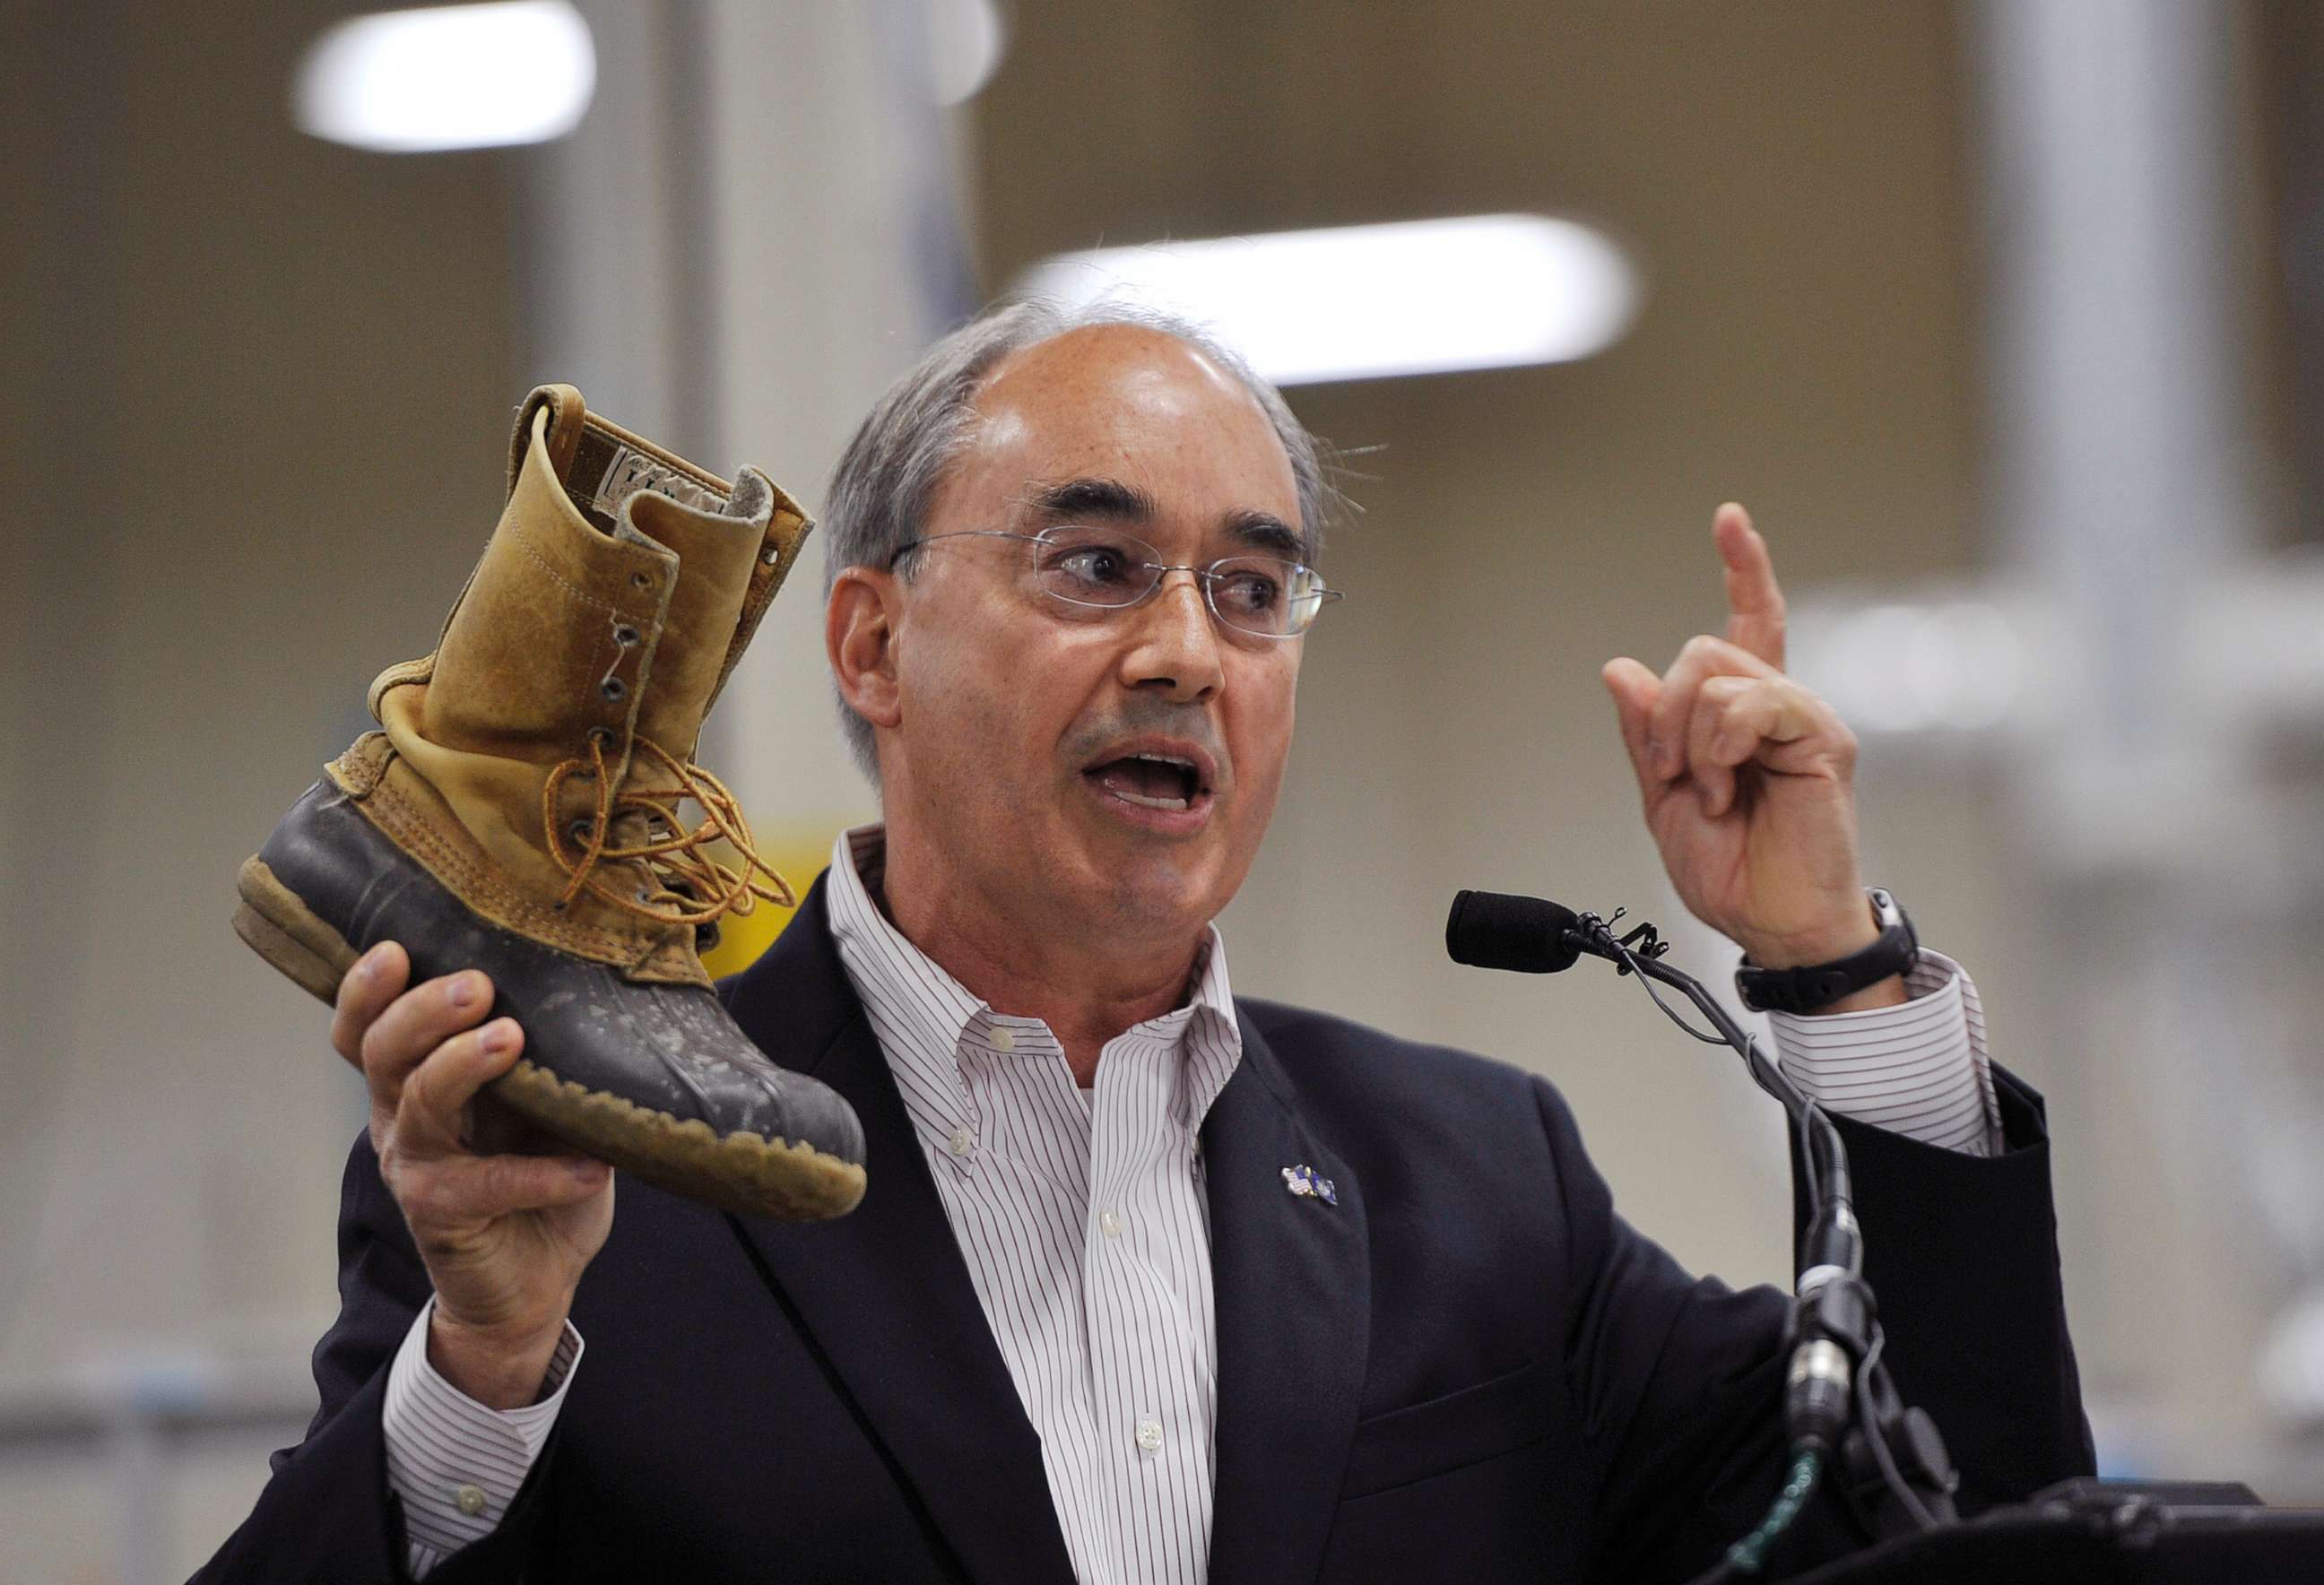 PHOTO: Rep. Bruce Poliquin shows of his thirty-year-old L.L. Bean boots during an event at the new production plant in Lewiston, Maine, August 17, 2017.